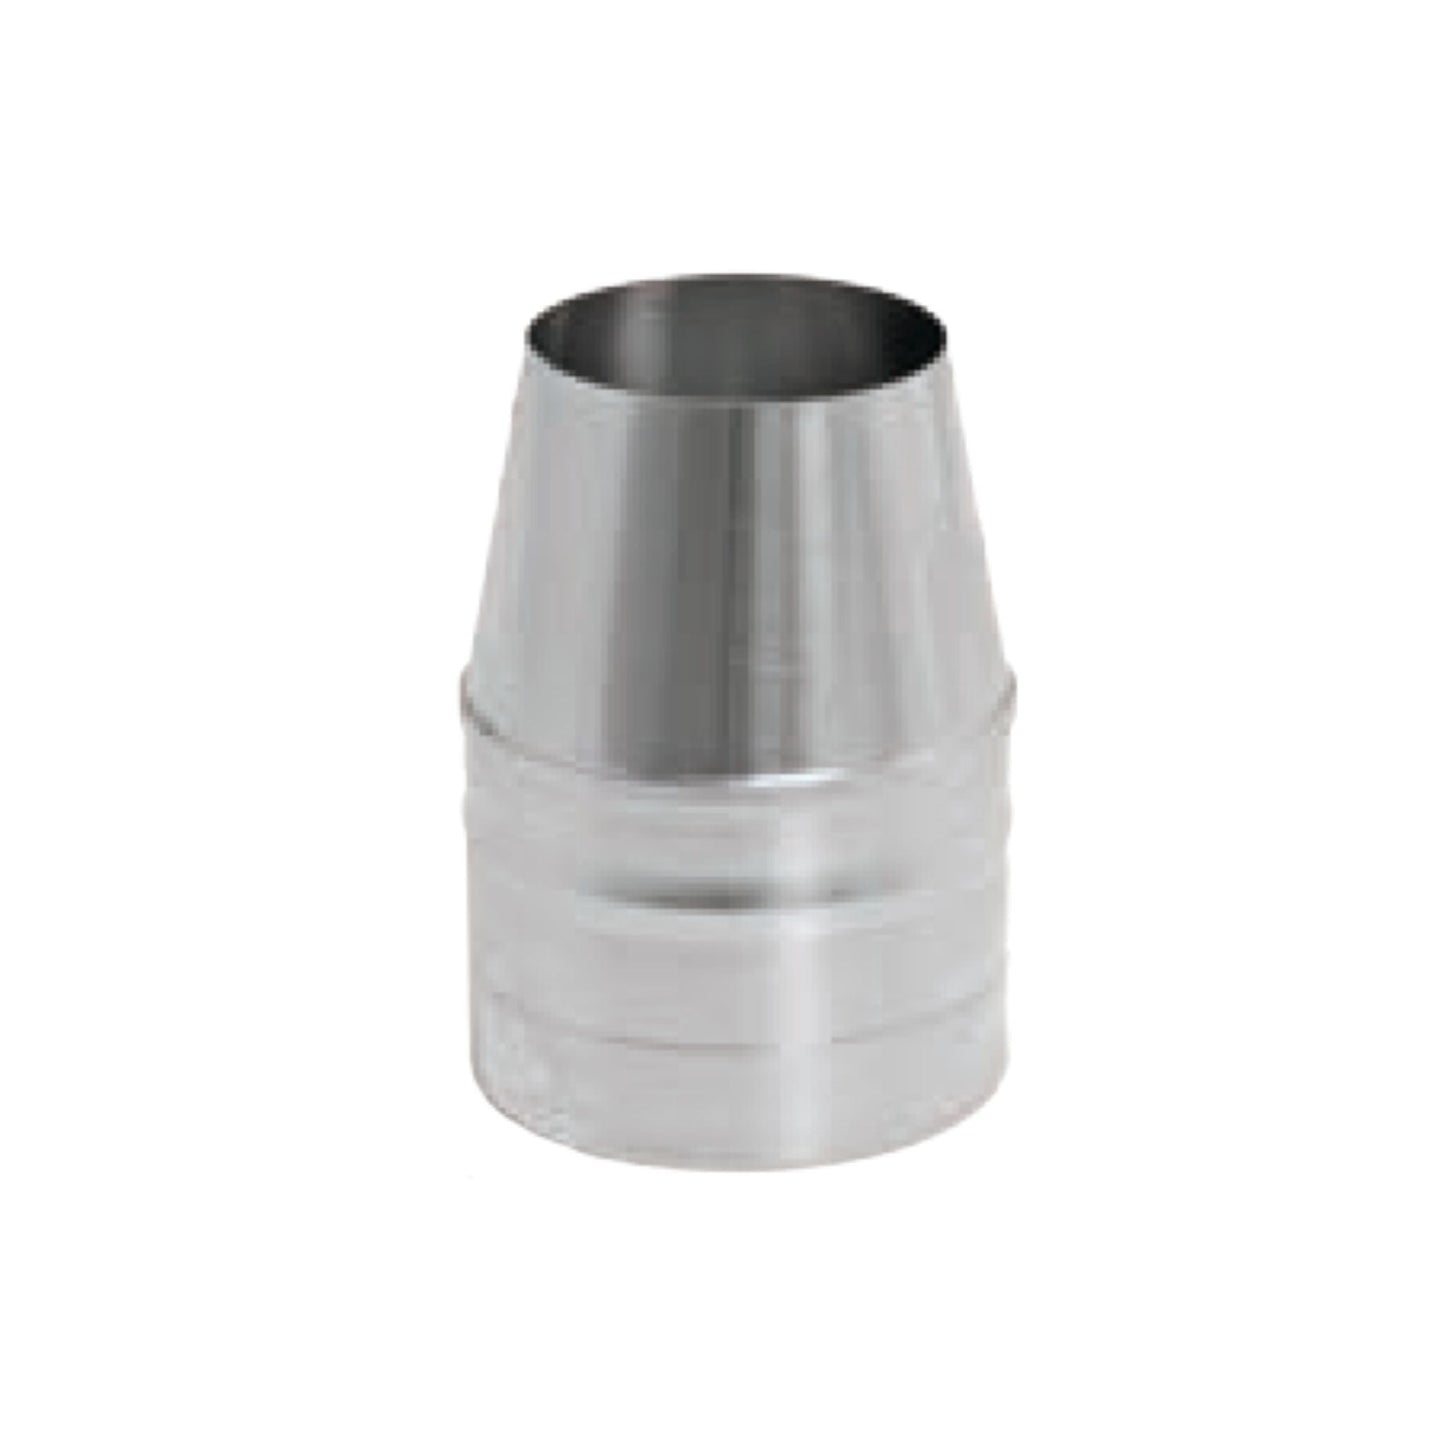 DuraVent FasNSeal 7" x 6" 29-4C Stainless Steel Termination Cone